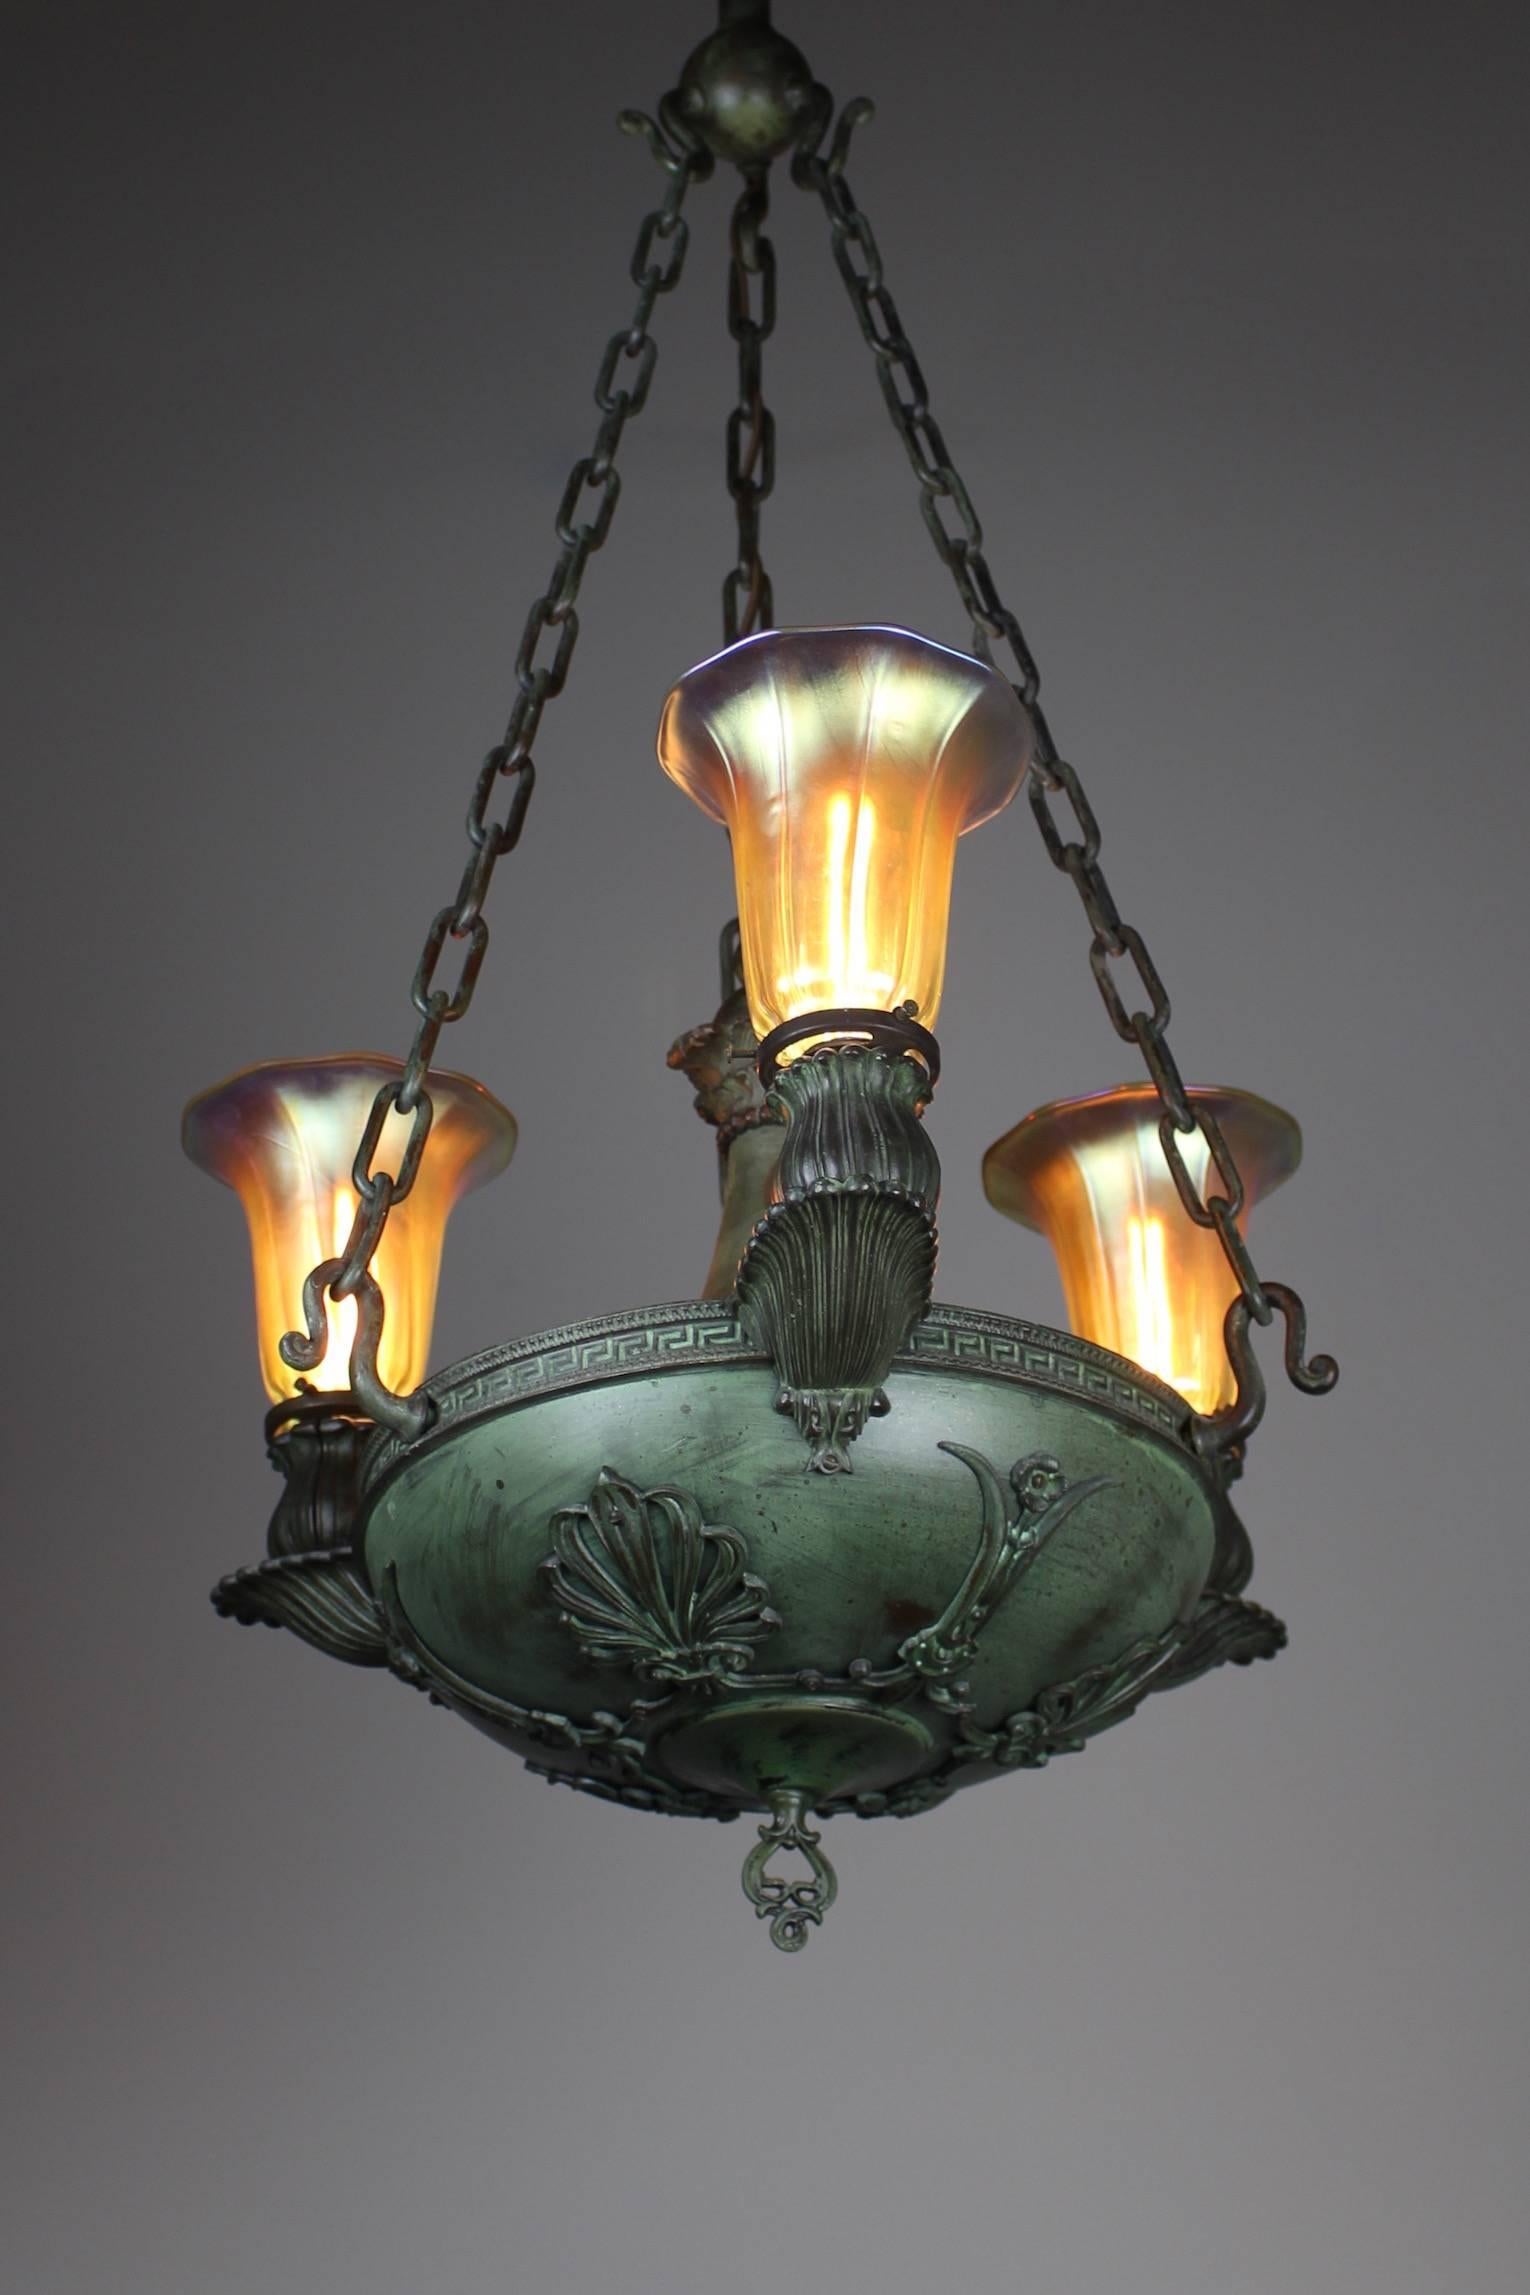 Quite a fine fixture made by Beardslee of Chicago, circa 1905. This three-arm sanctuary light was done in the style of Greek Revival and wears art glass aurene shades. This light has been rewired and restores to its original verdigris finish. Ready